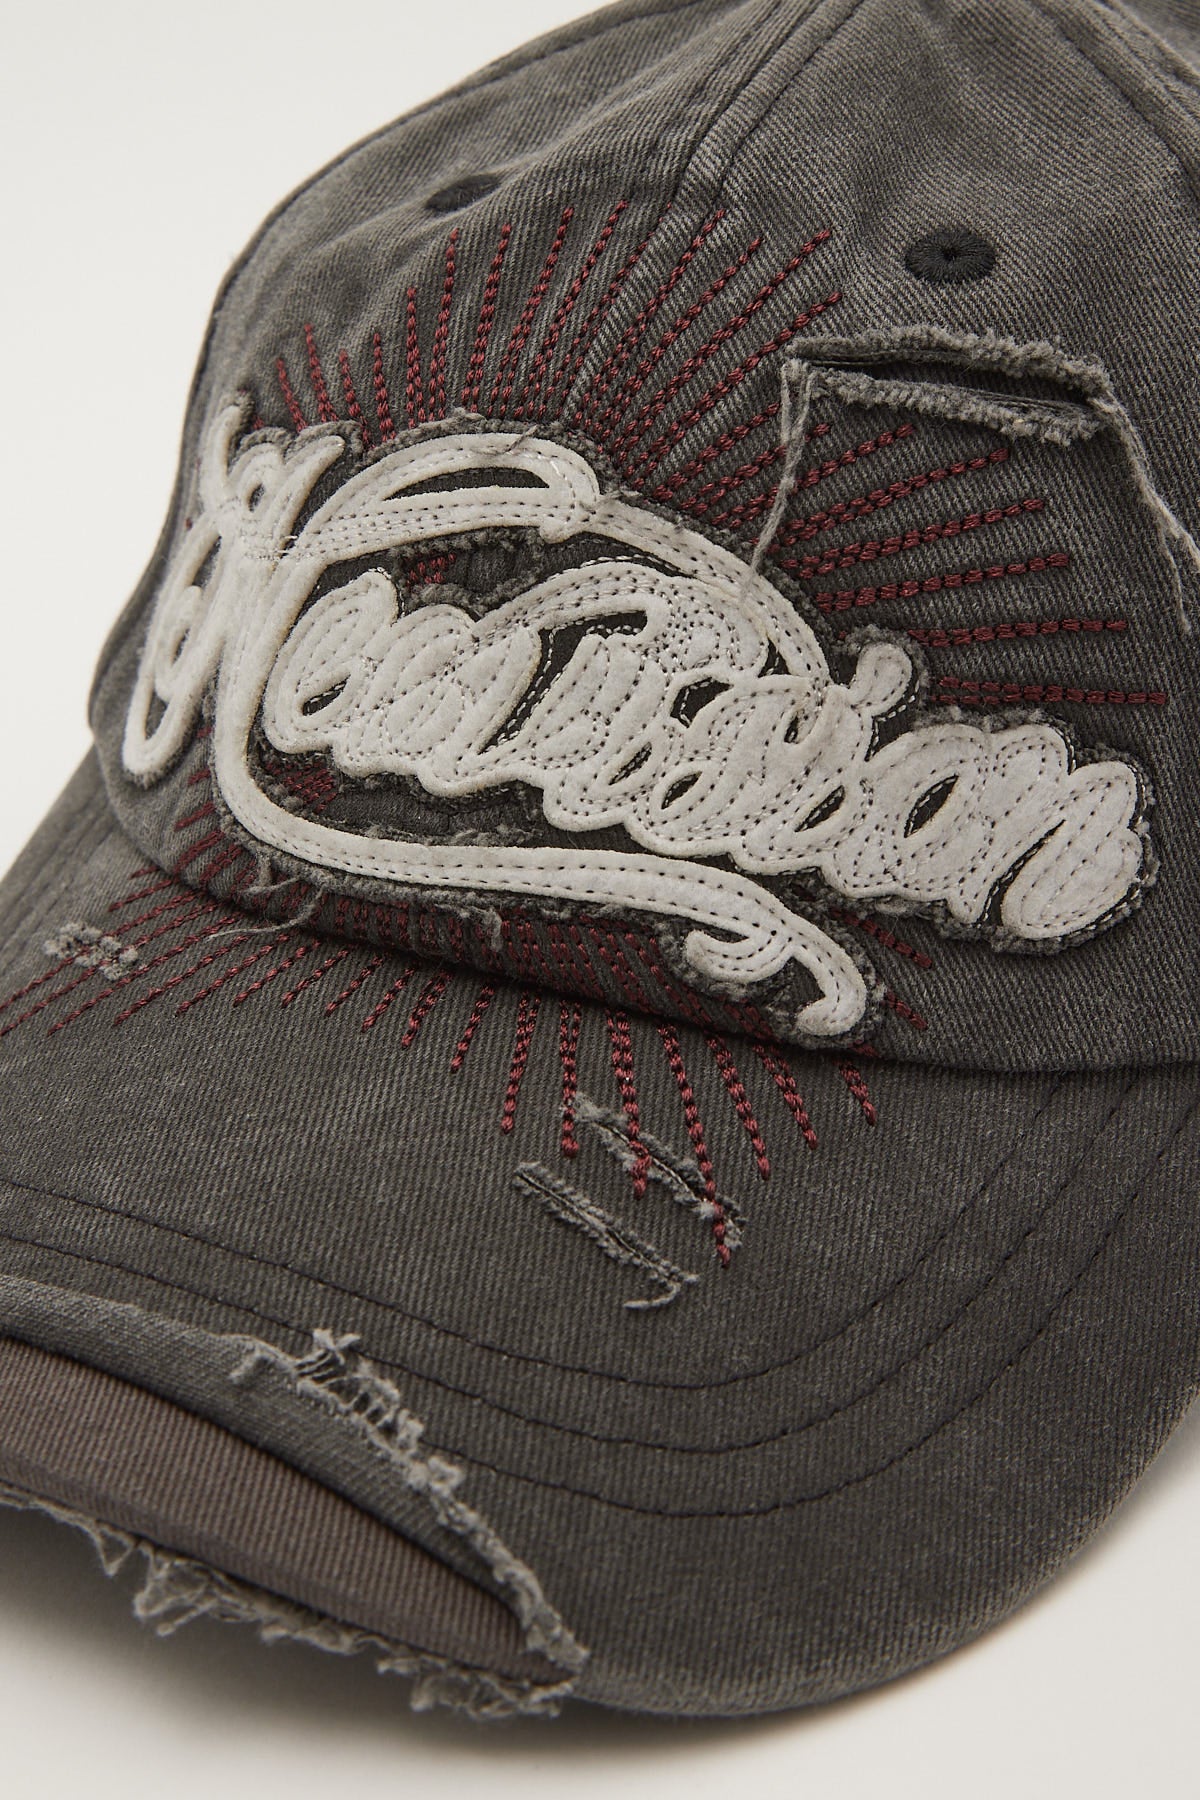 Neovision Asteroid Distressed Washed Cap Washed Black